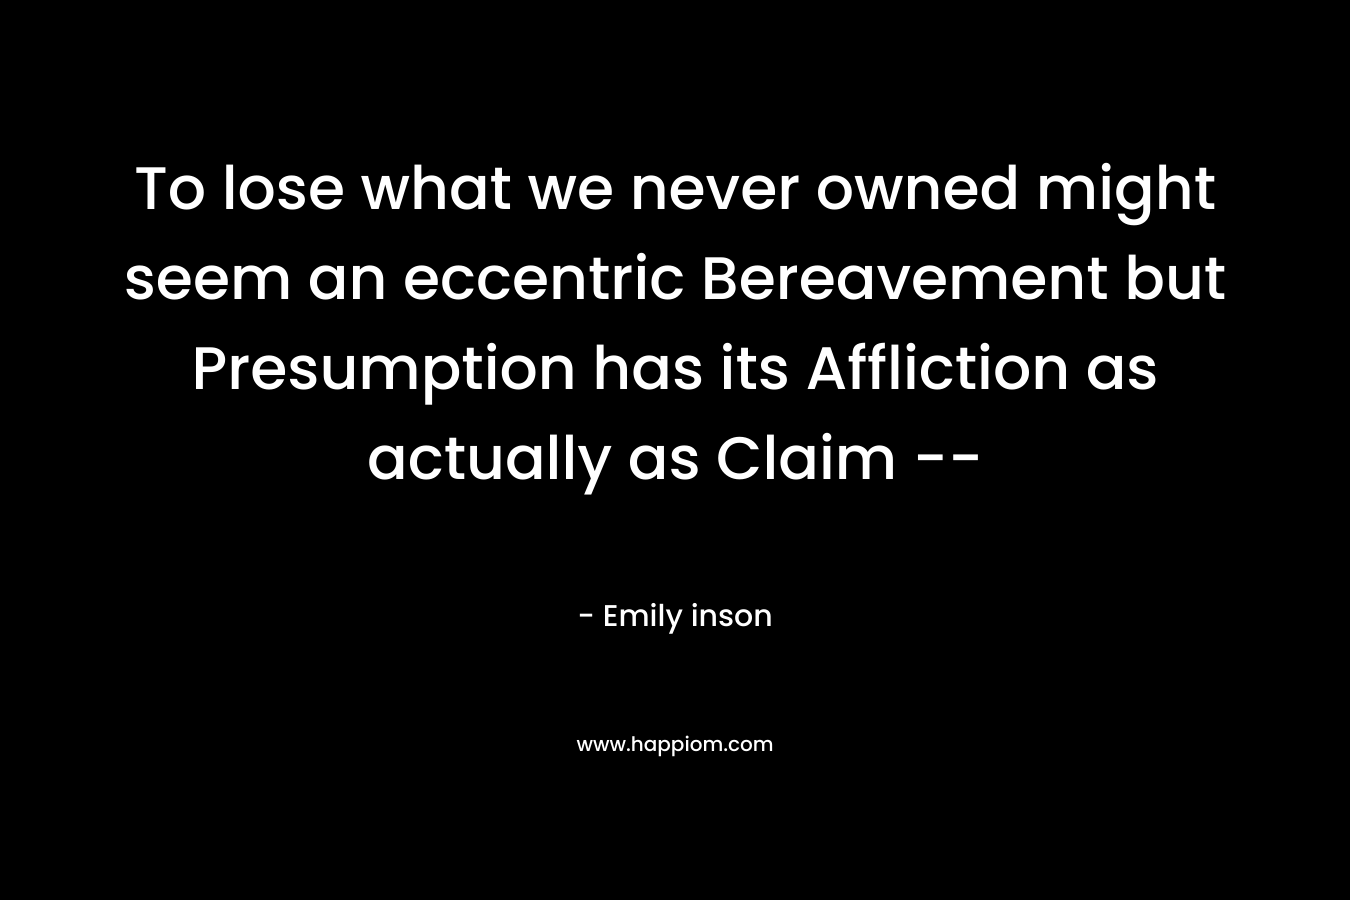 To lose what we never owned might seem an eccentric Bereavement but Presumption has its Affliction as actually as Claim --